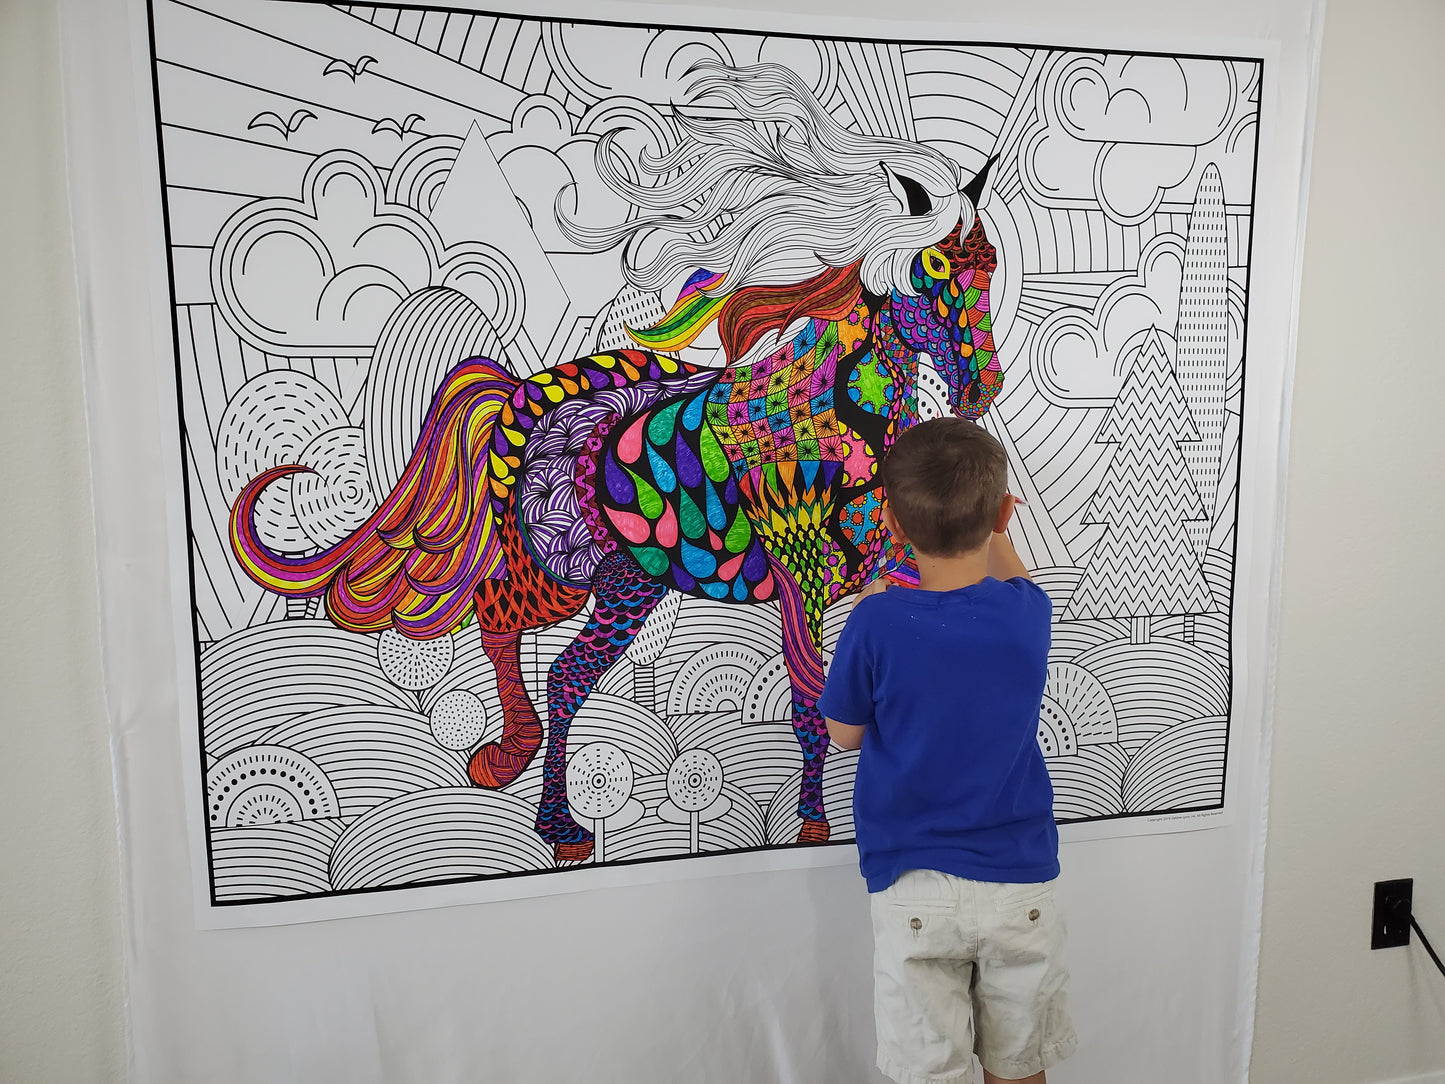 Horse Personalized Giant Coloring Poster 46"x60"